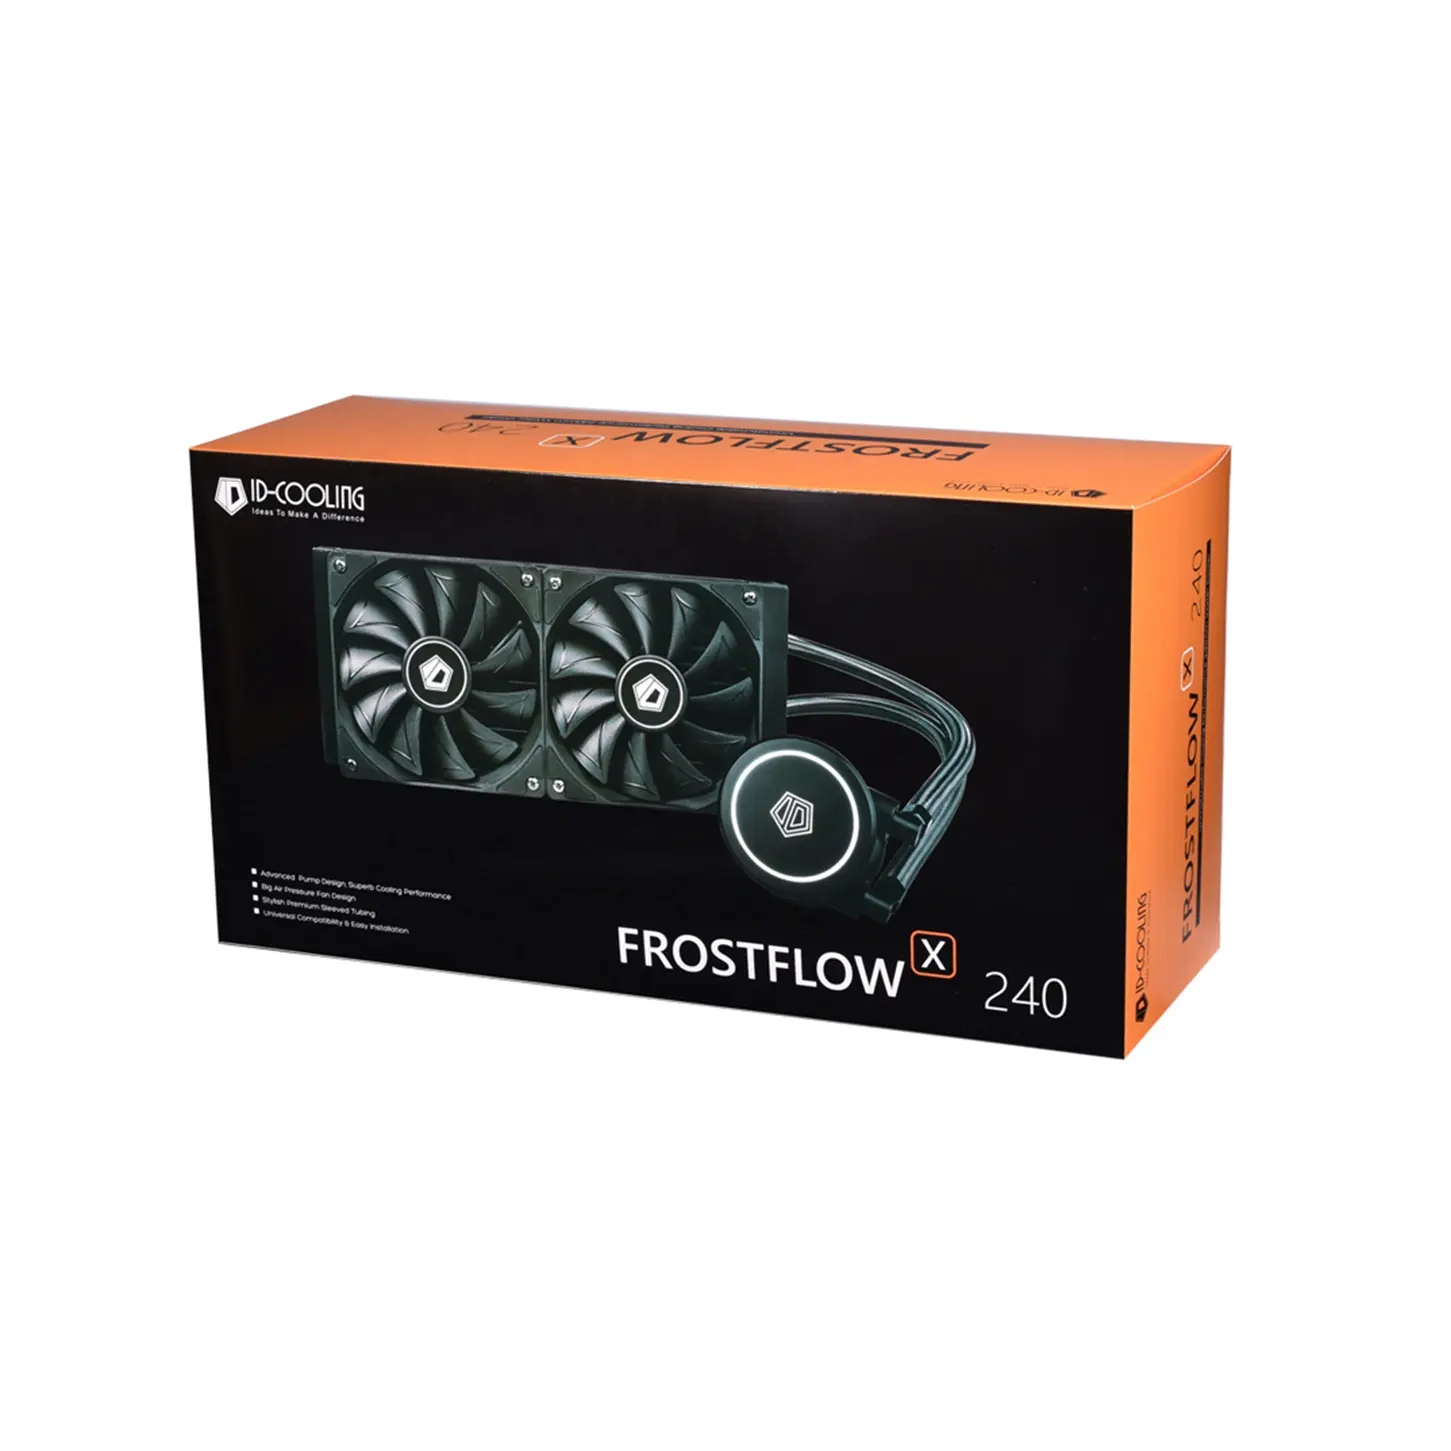 Hot Sale ID-COOLING FROSTFLOW X 240 Water Cooler For Gaming Computer Cooling Addressable Aio CPU Cooler